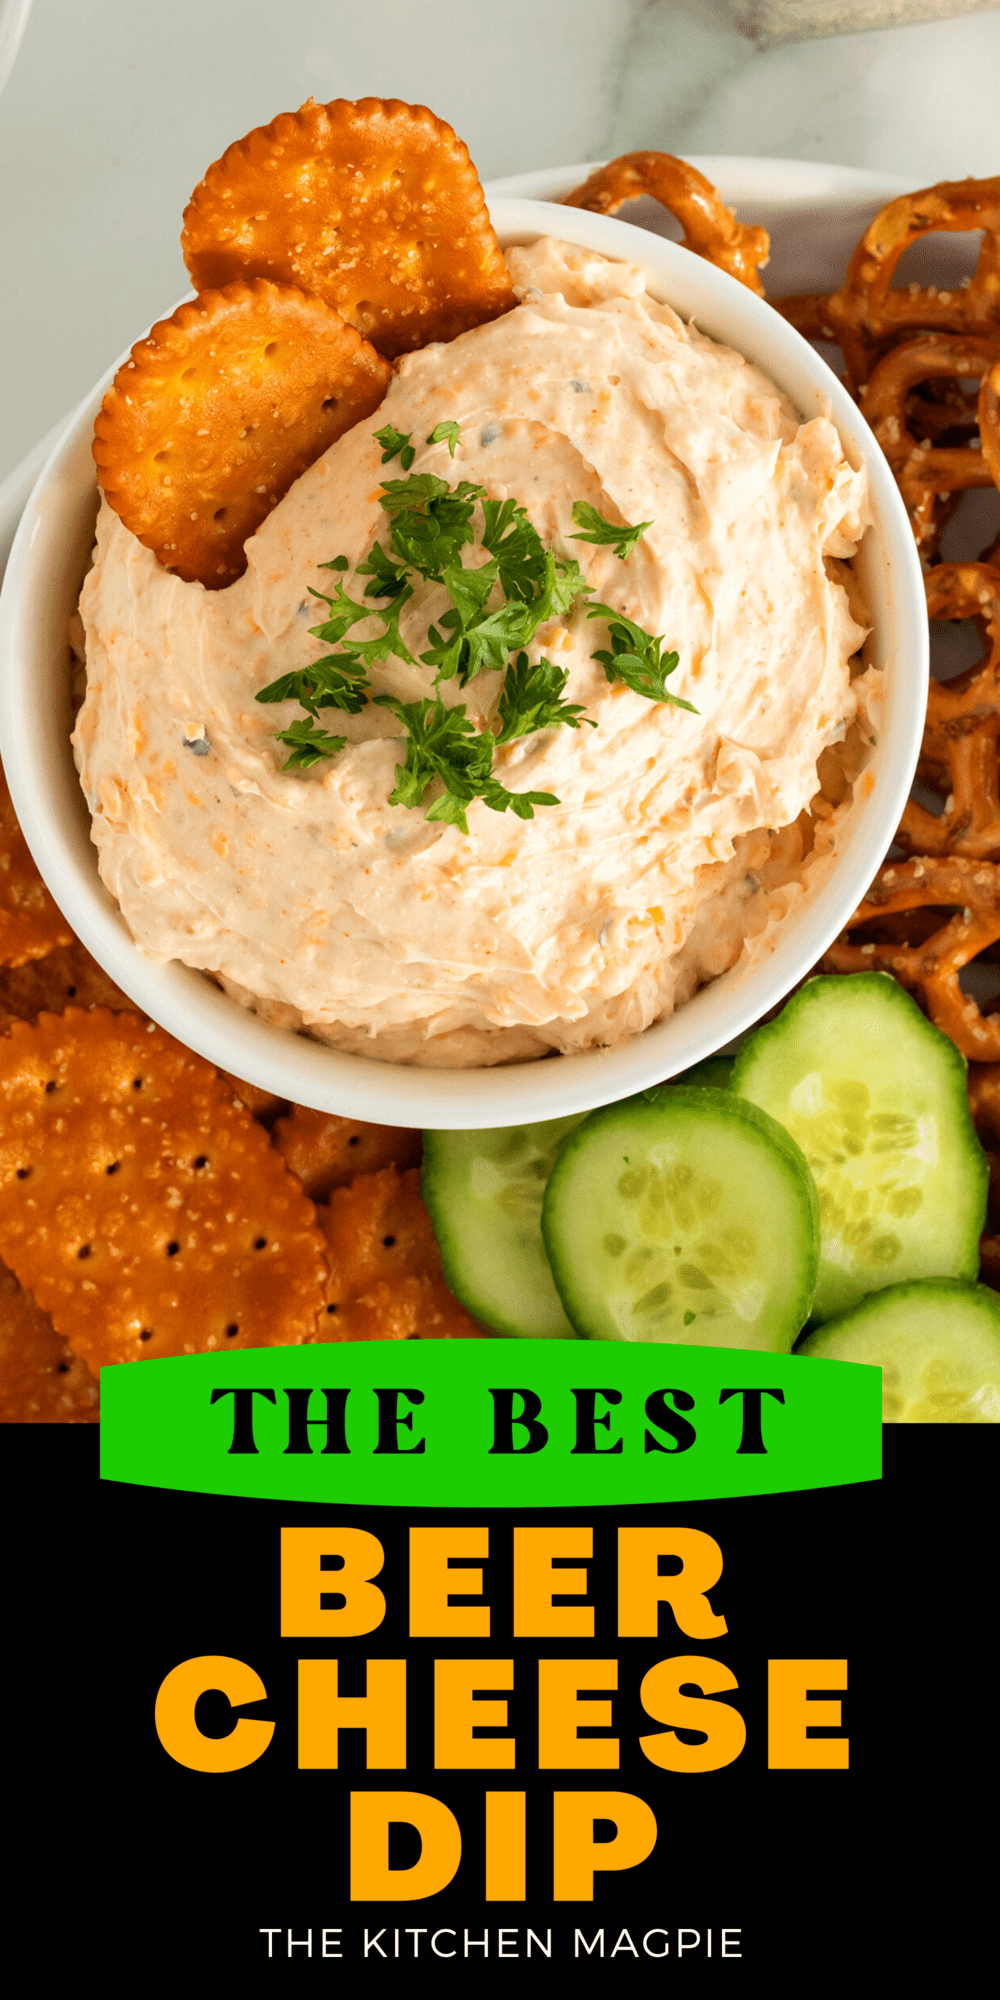 Beer cheese dip is the ultimate comfort appetizer. Combining beer and cheese, nothing conjures up images of visiting with friends and good conversation more than this dip.